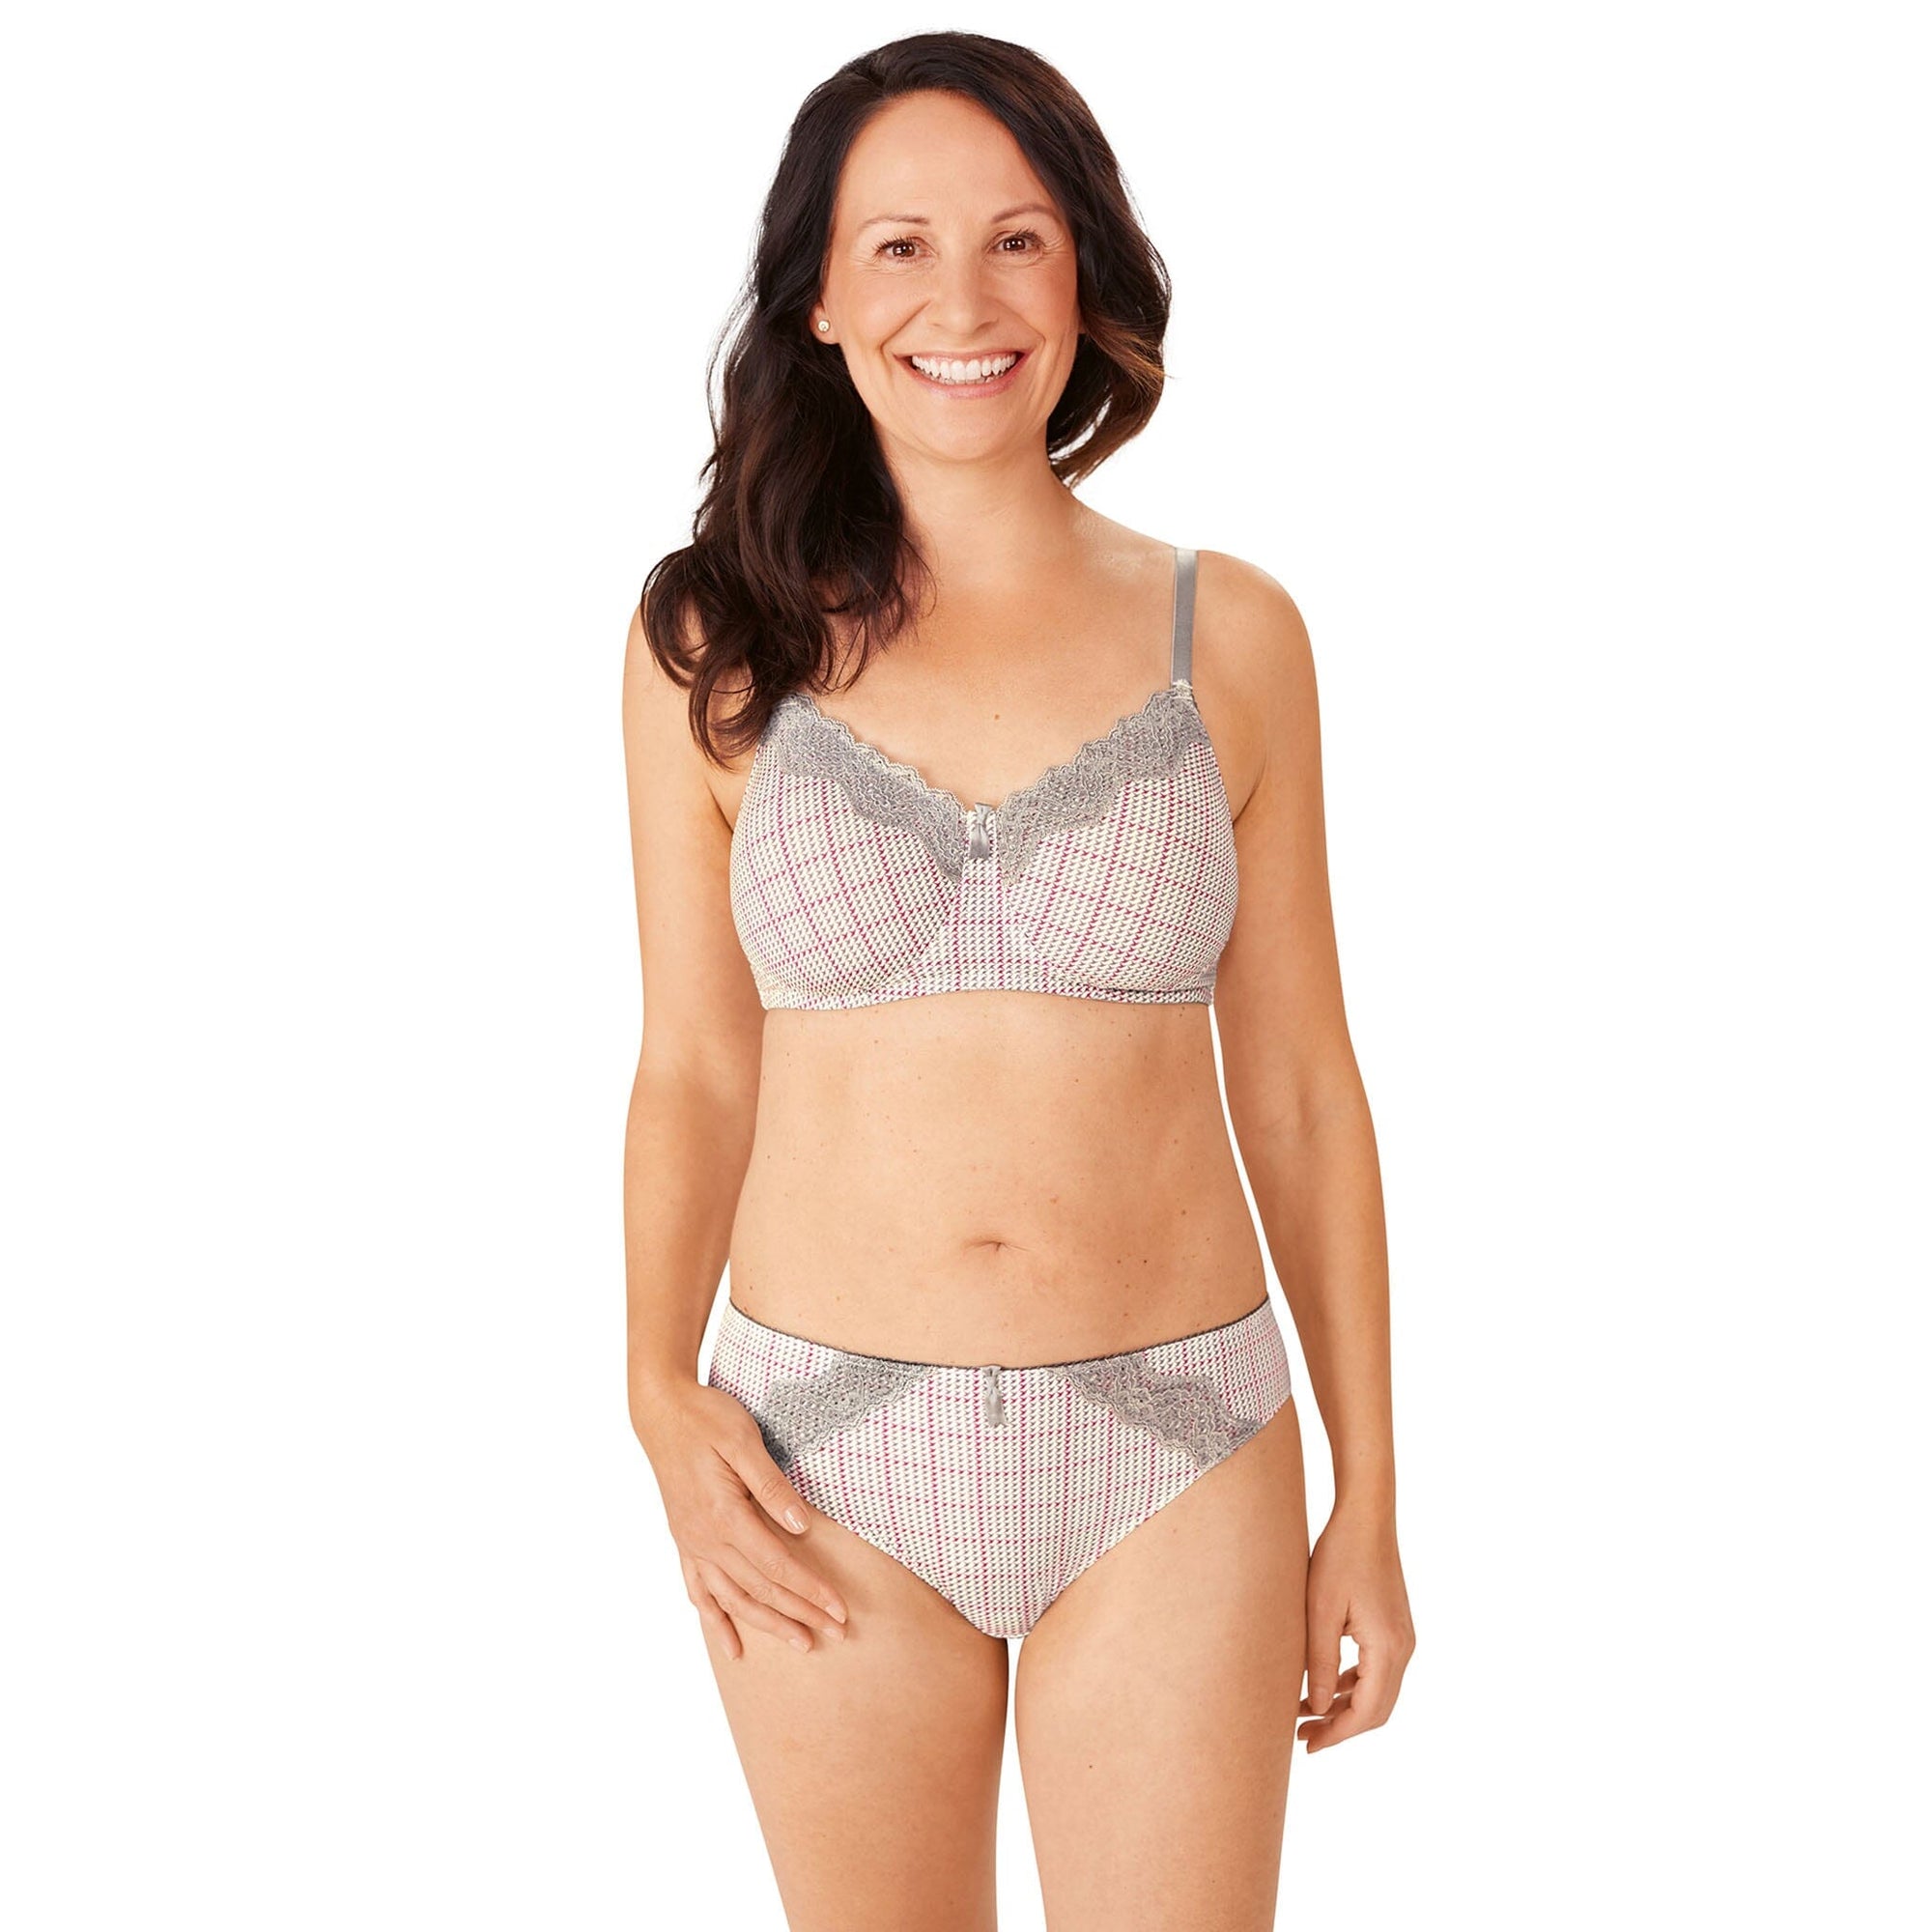 Amoena® Luna Panty Shown in Grey/Multi with Luna Padded Bra (#9605). Front View.